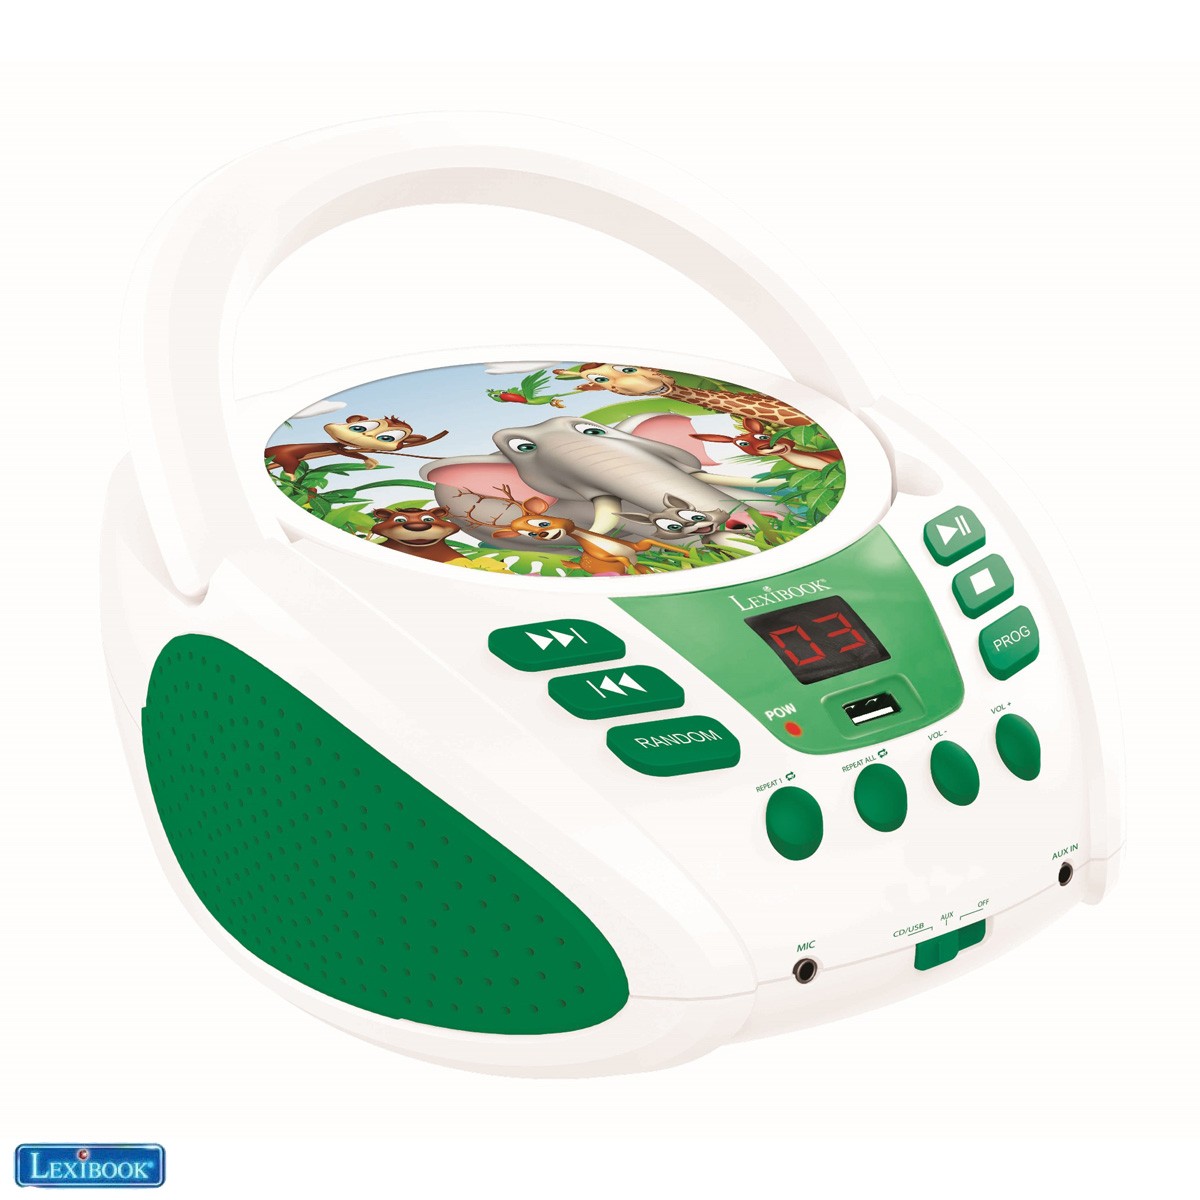 Radio CD player Animals for Kids, AUX-IN jack